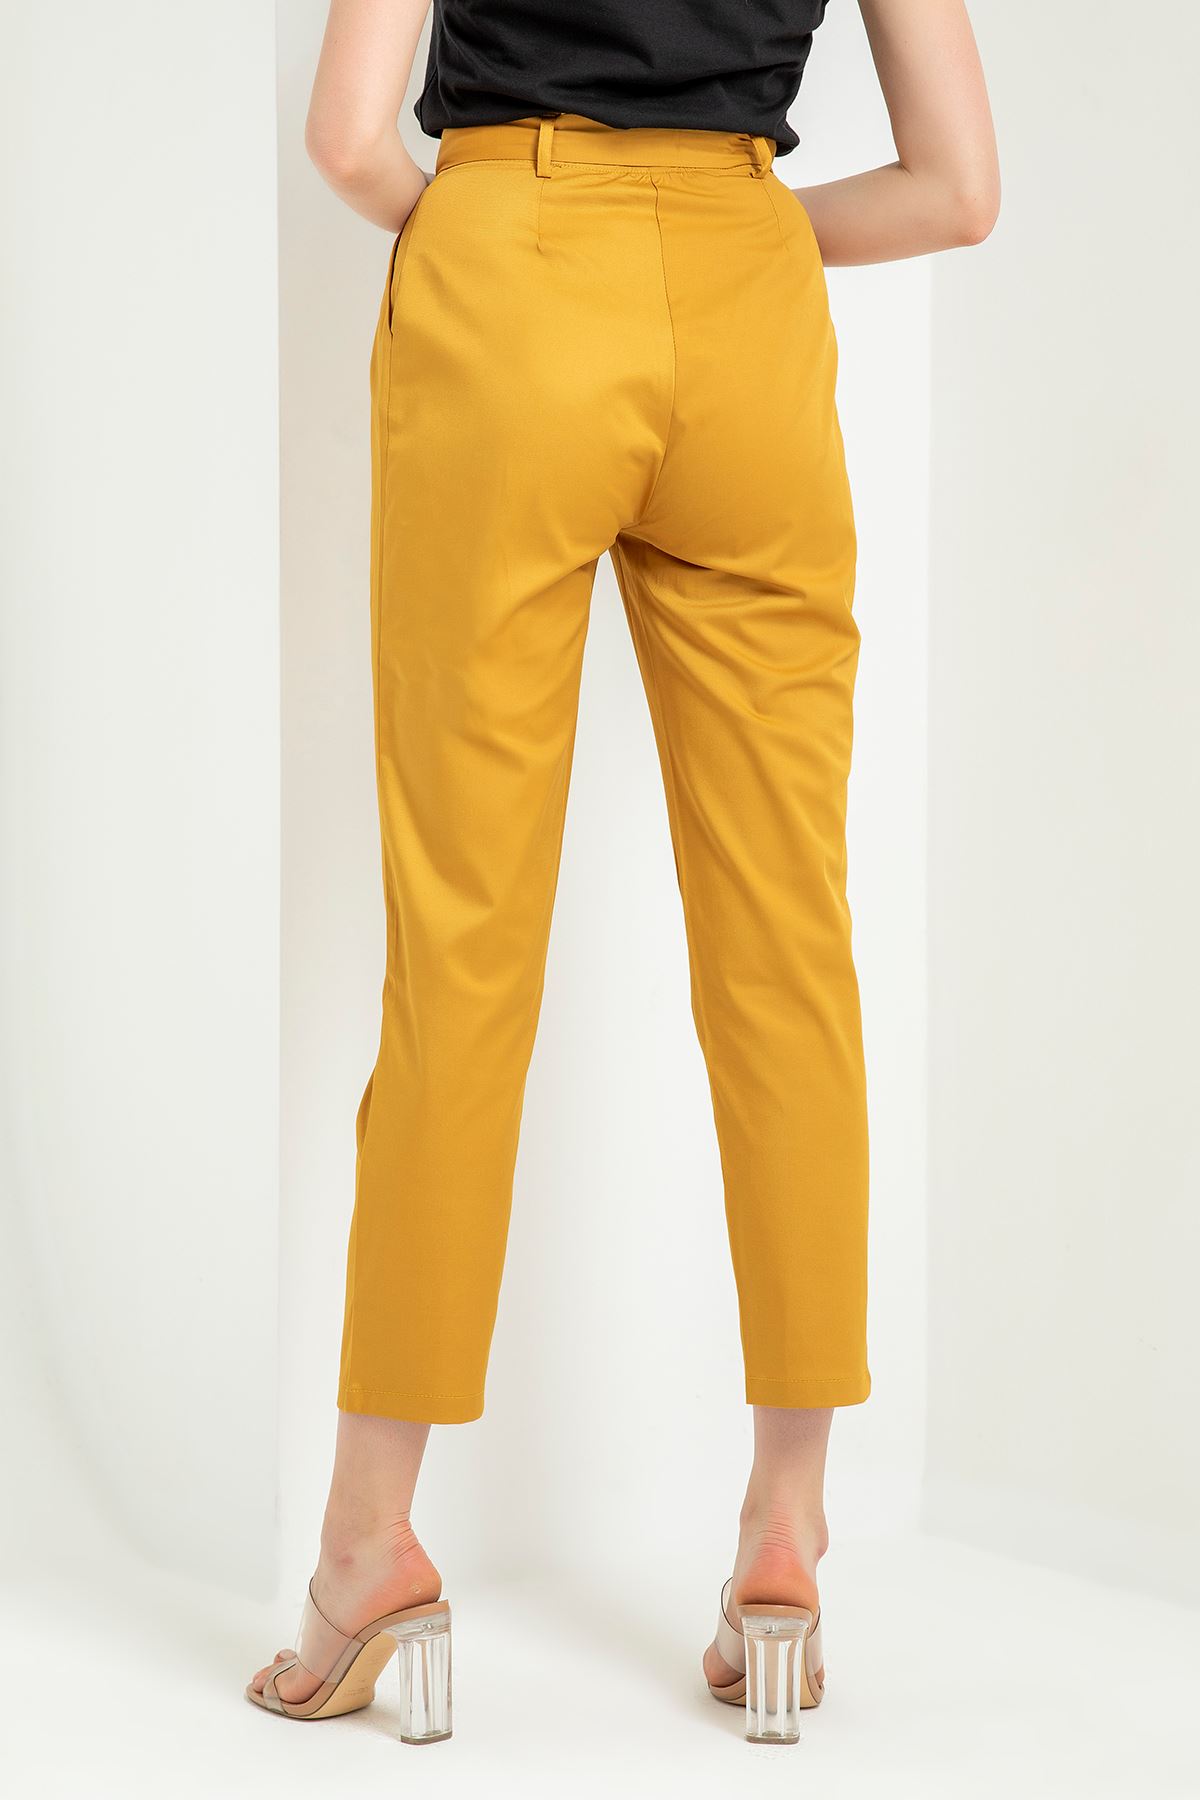 Woven Fabric Ankle Length Carrot Style Belted Women'S Trouser - Mustard